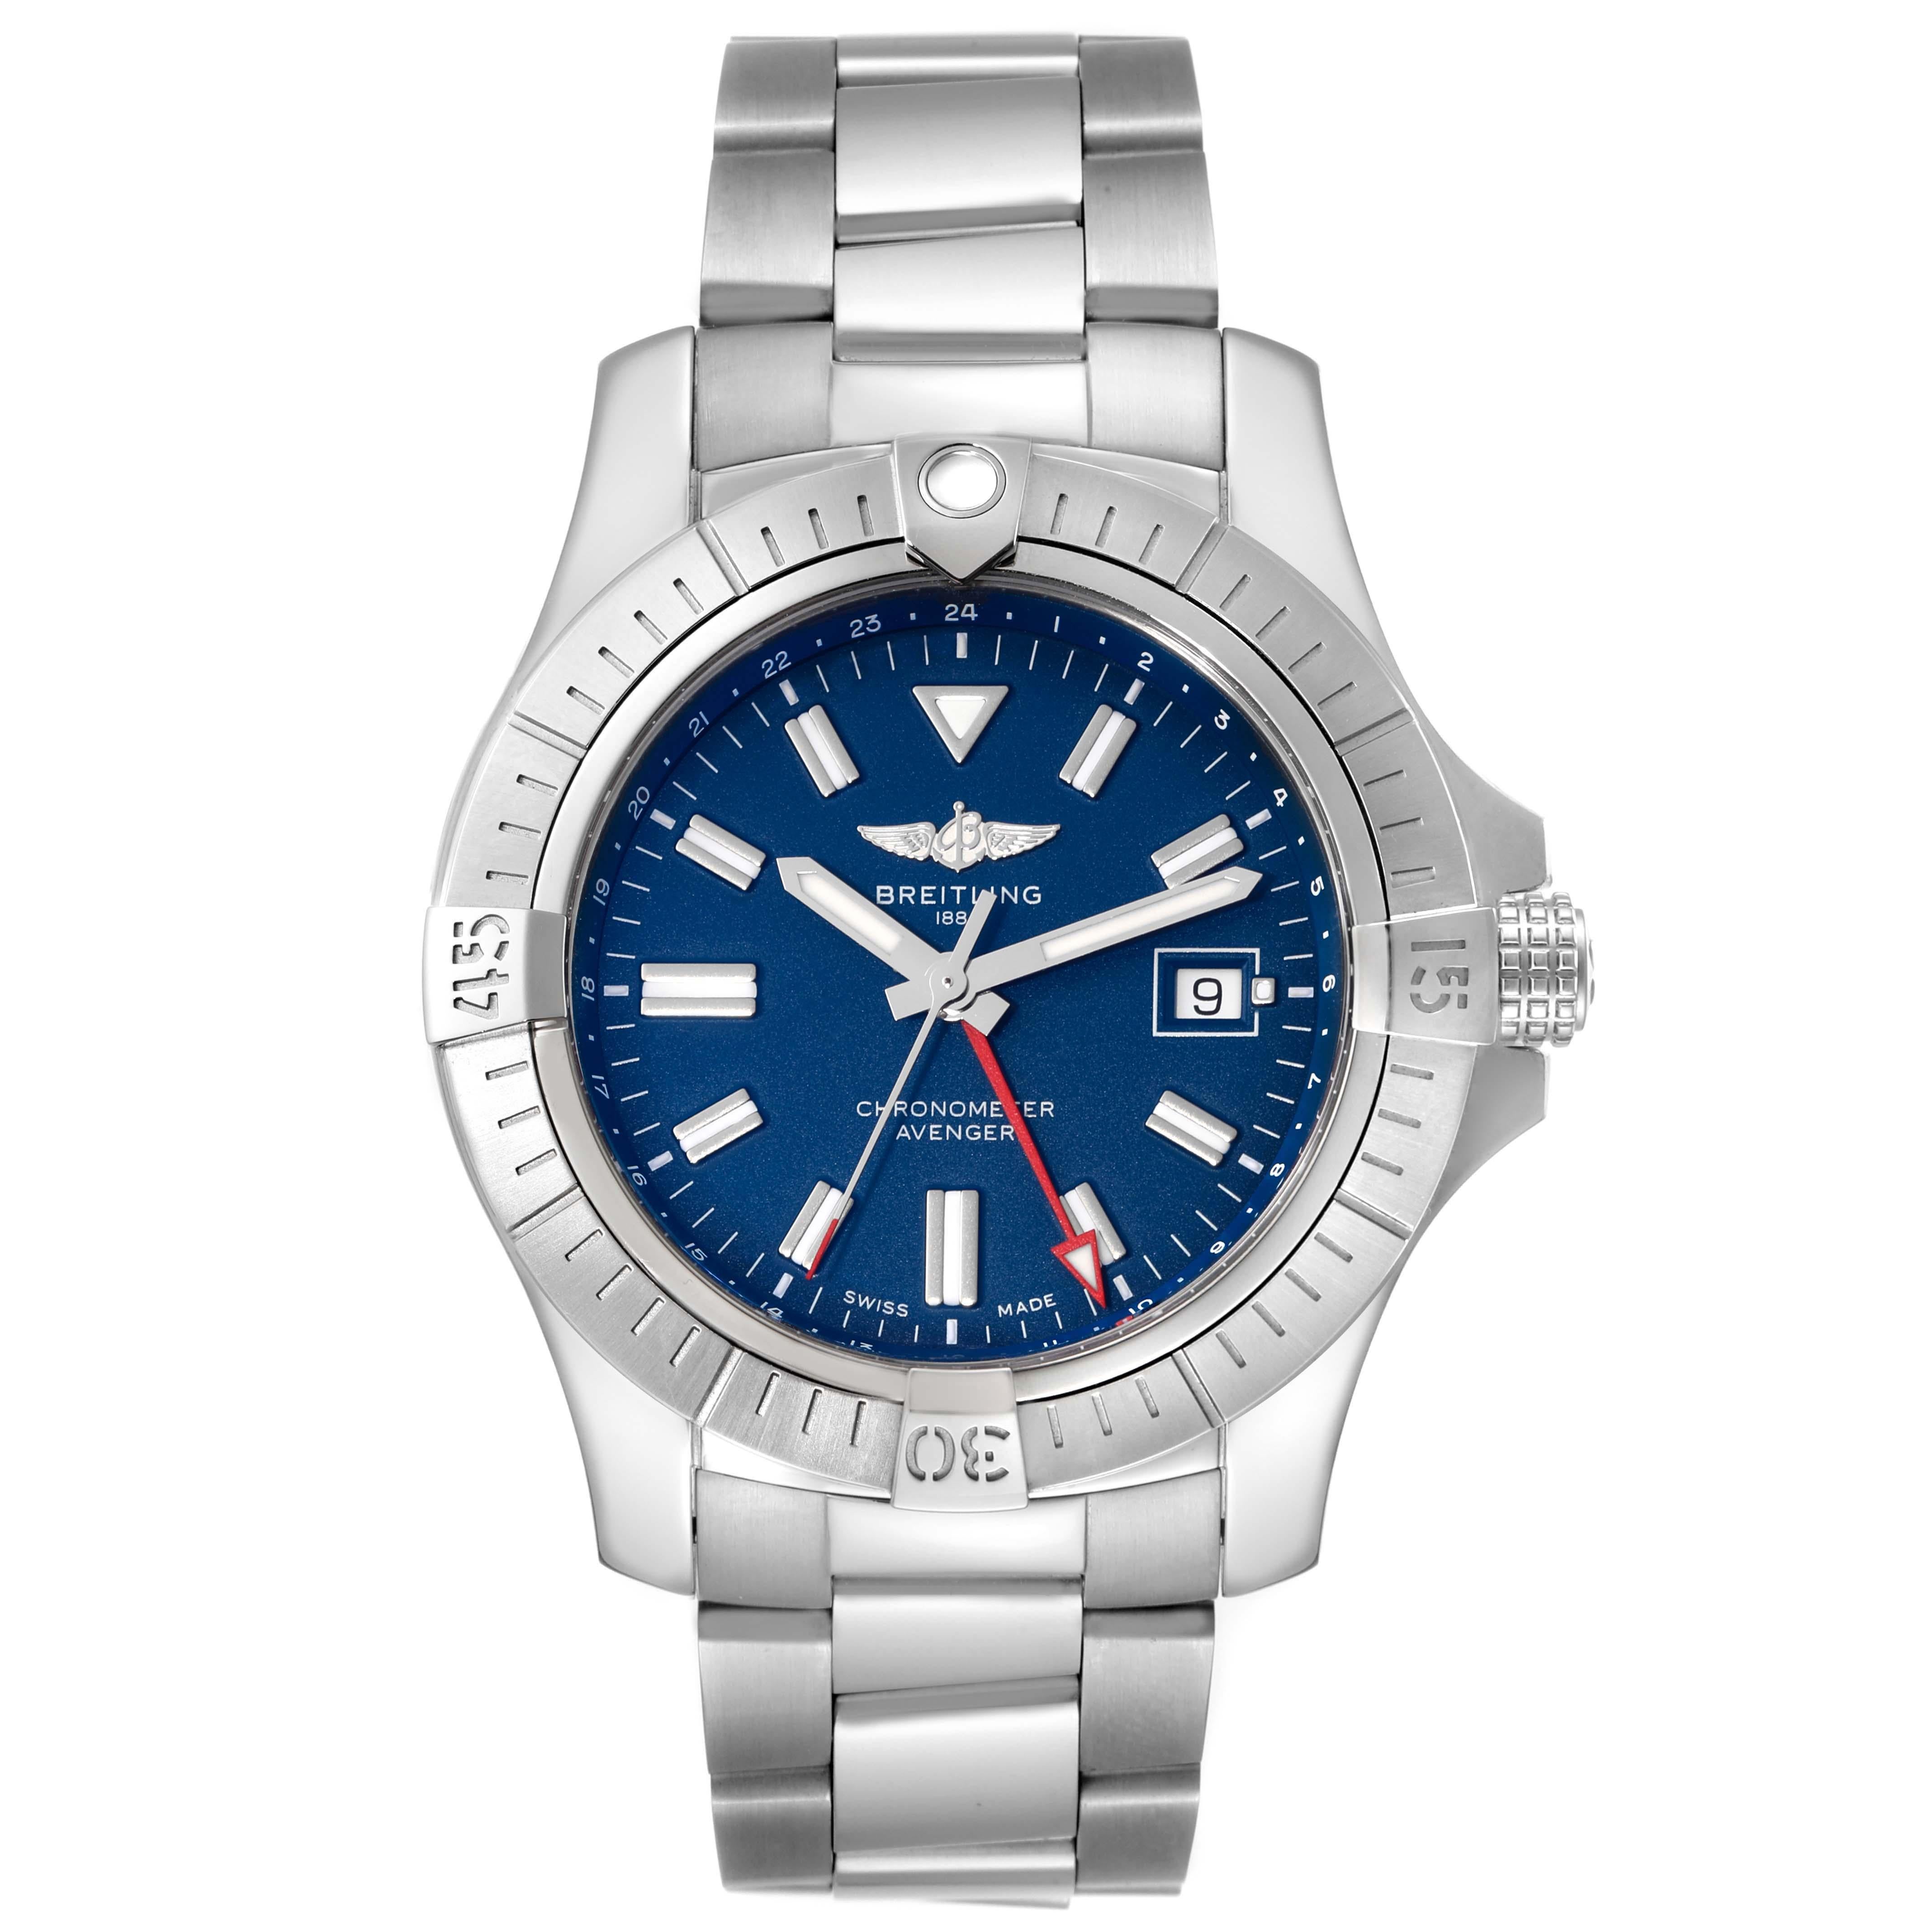 Breitling Aeromarine Avenger II GMT Blue Dial Steel Mens Watch A32395 Box Card. Automatic self-winding movement. Stainless steel case 45 mm in diameter with screw-down crown. Stainless steel unidirectional rotating bezel. 0-60 elapsed-time. Four 15